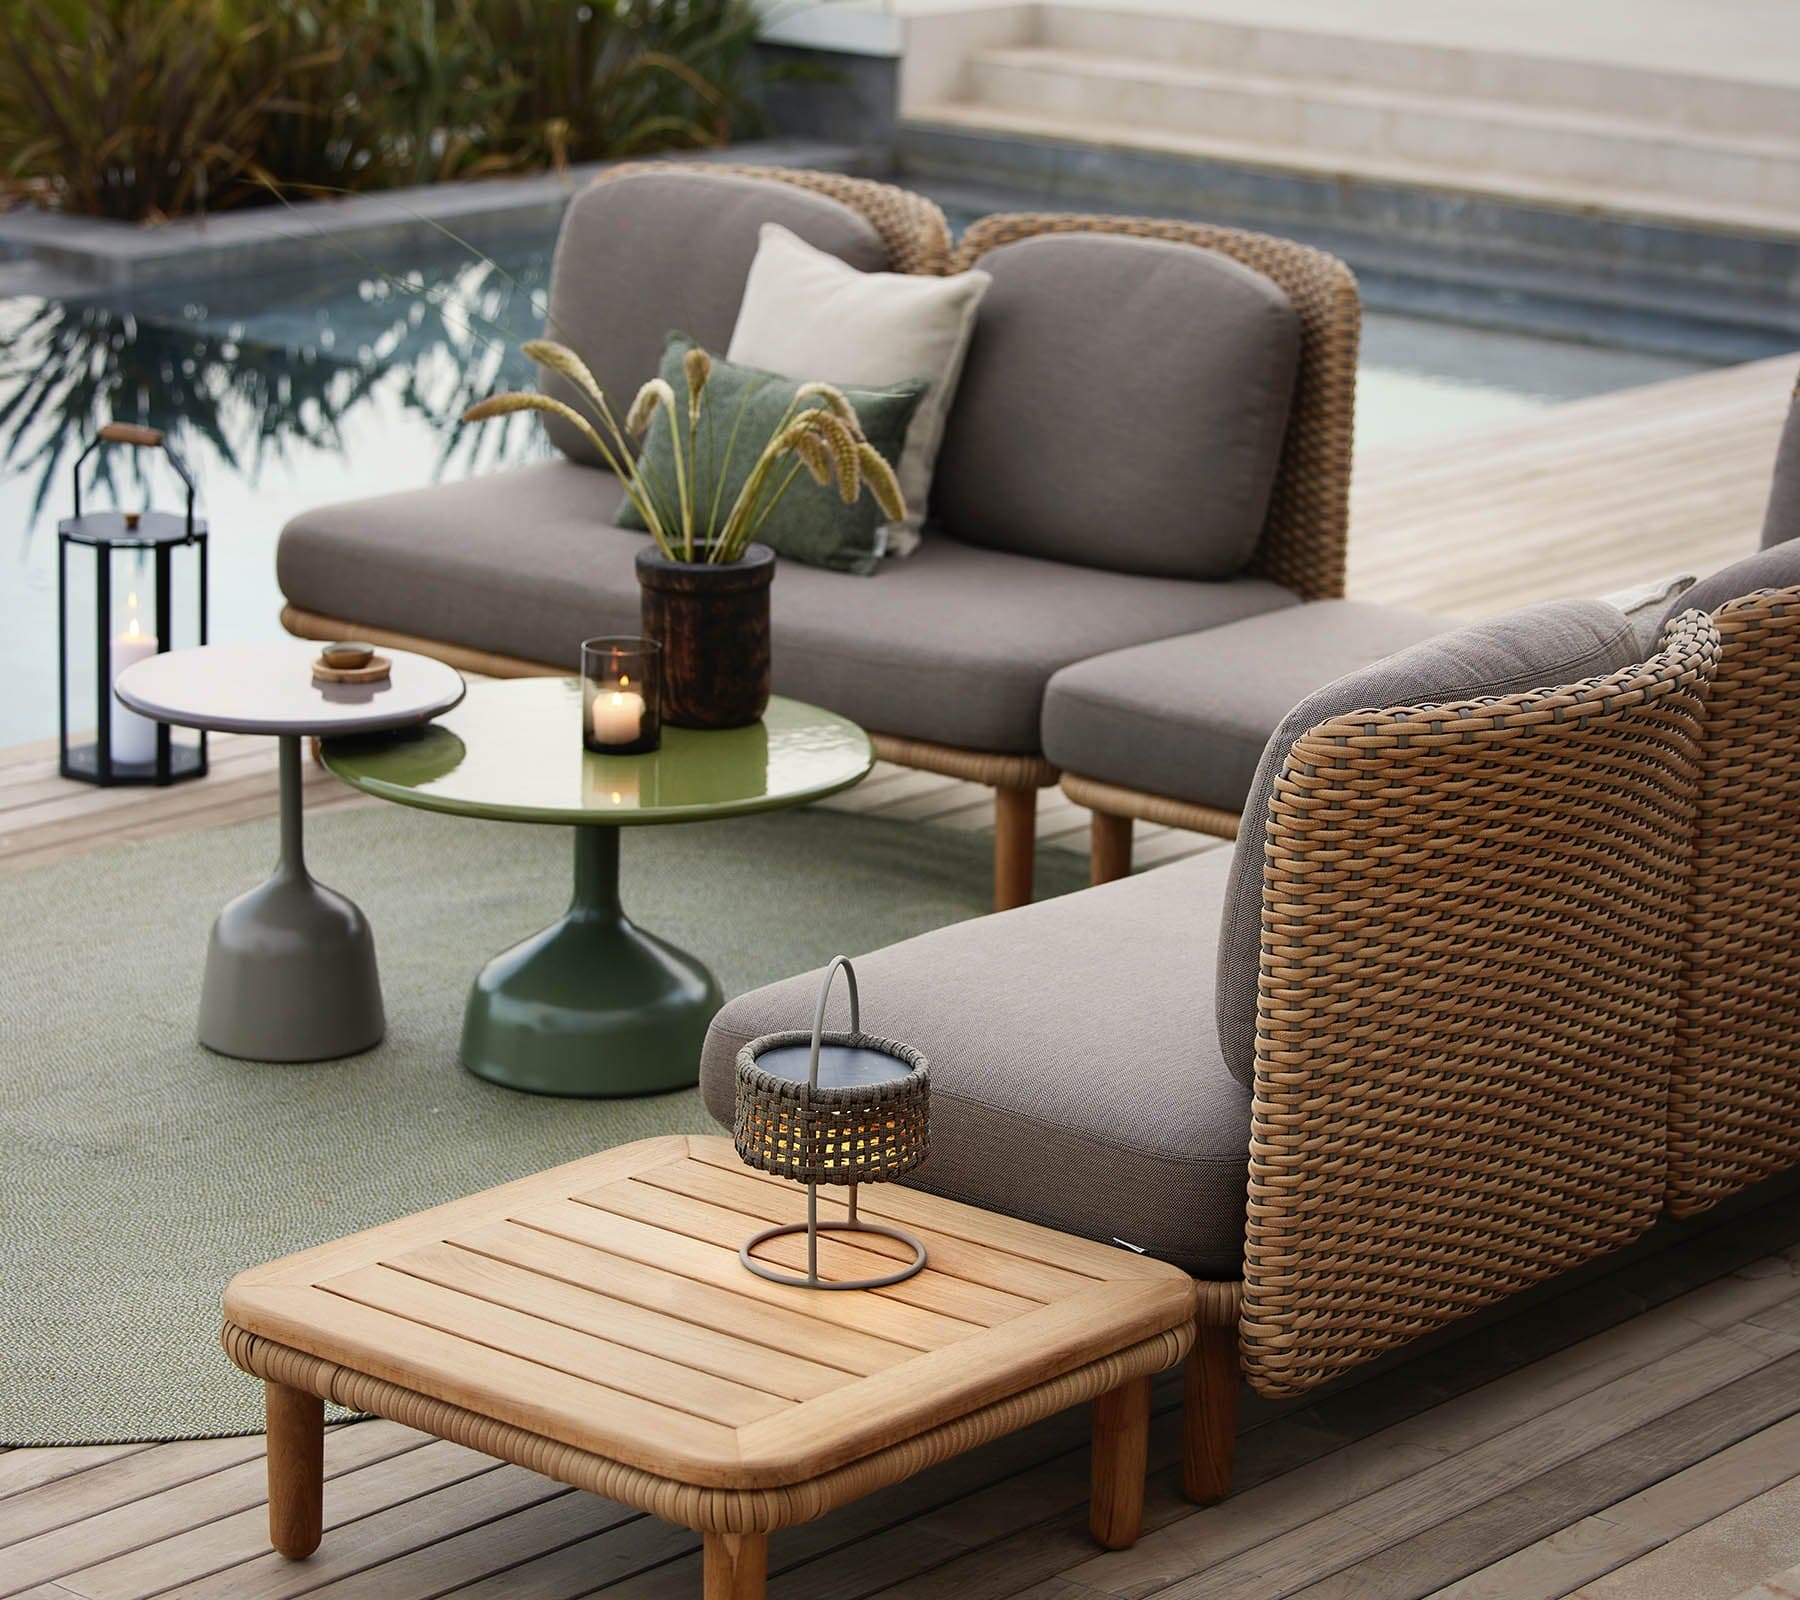 Boxhill's Illusion Outdoor Lamp | With Handle lifestyle image at top of Arch Outdoor Coffee Table, with Glaze Outdoor Round Coffee Table and Arch Sofa Collection at poolside